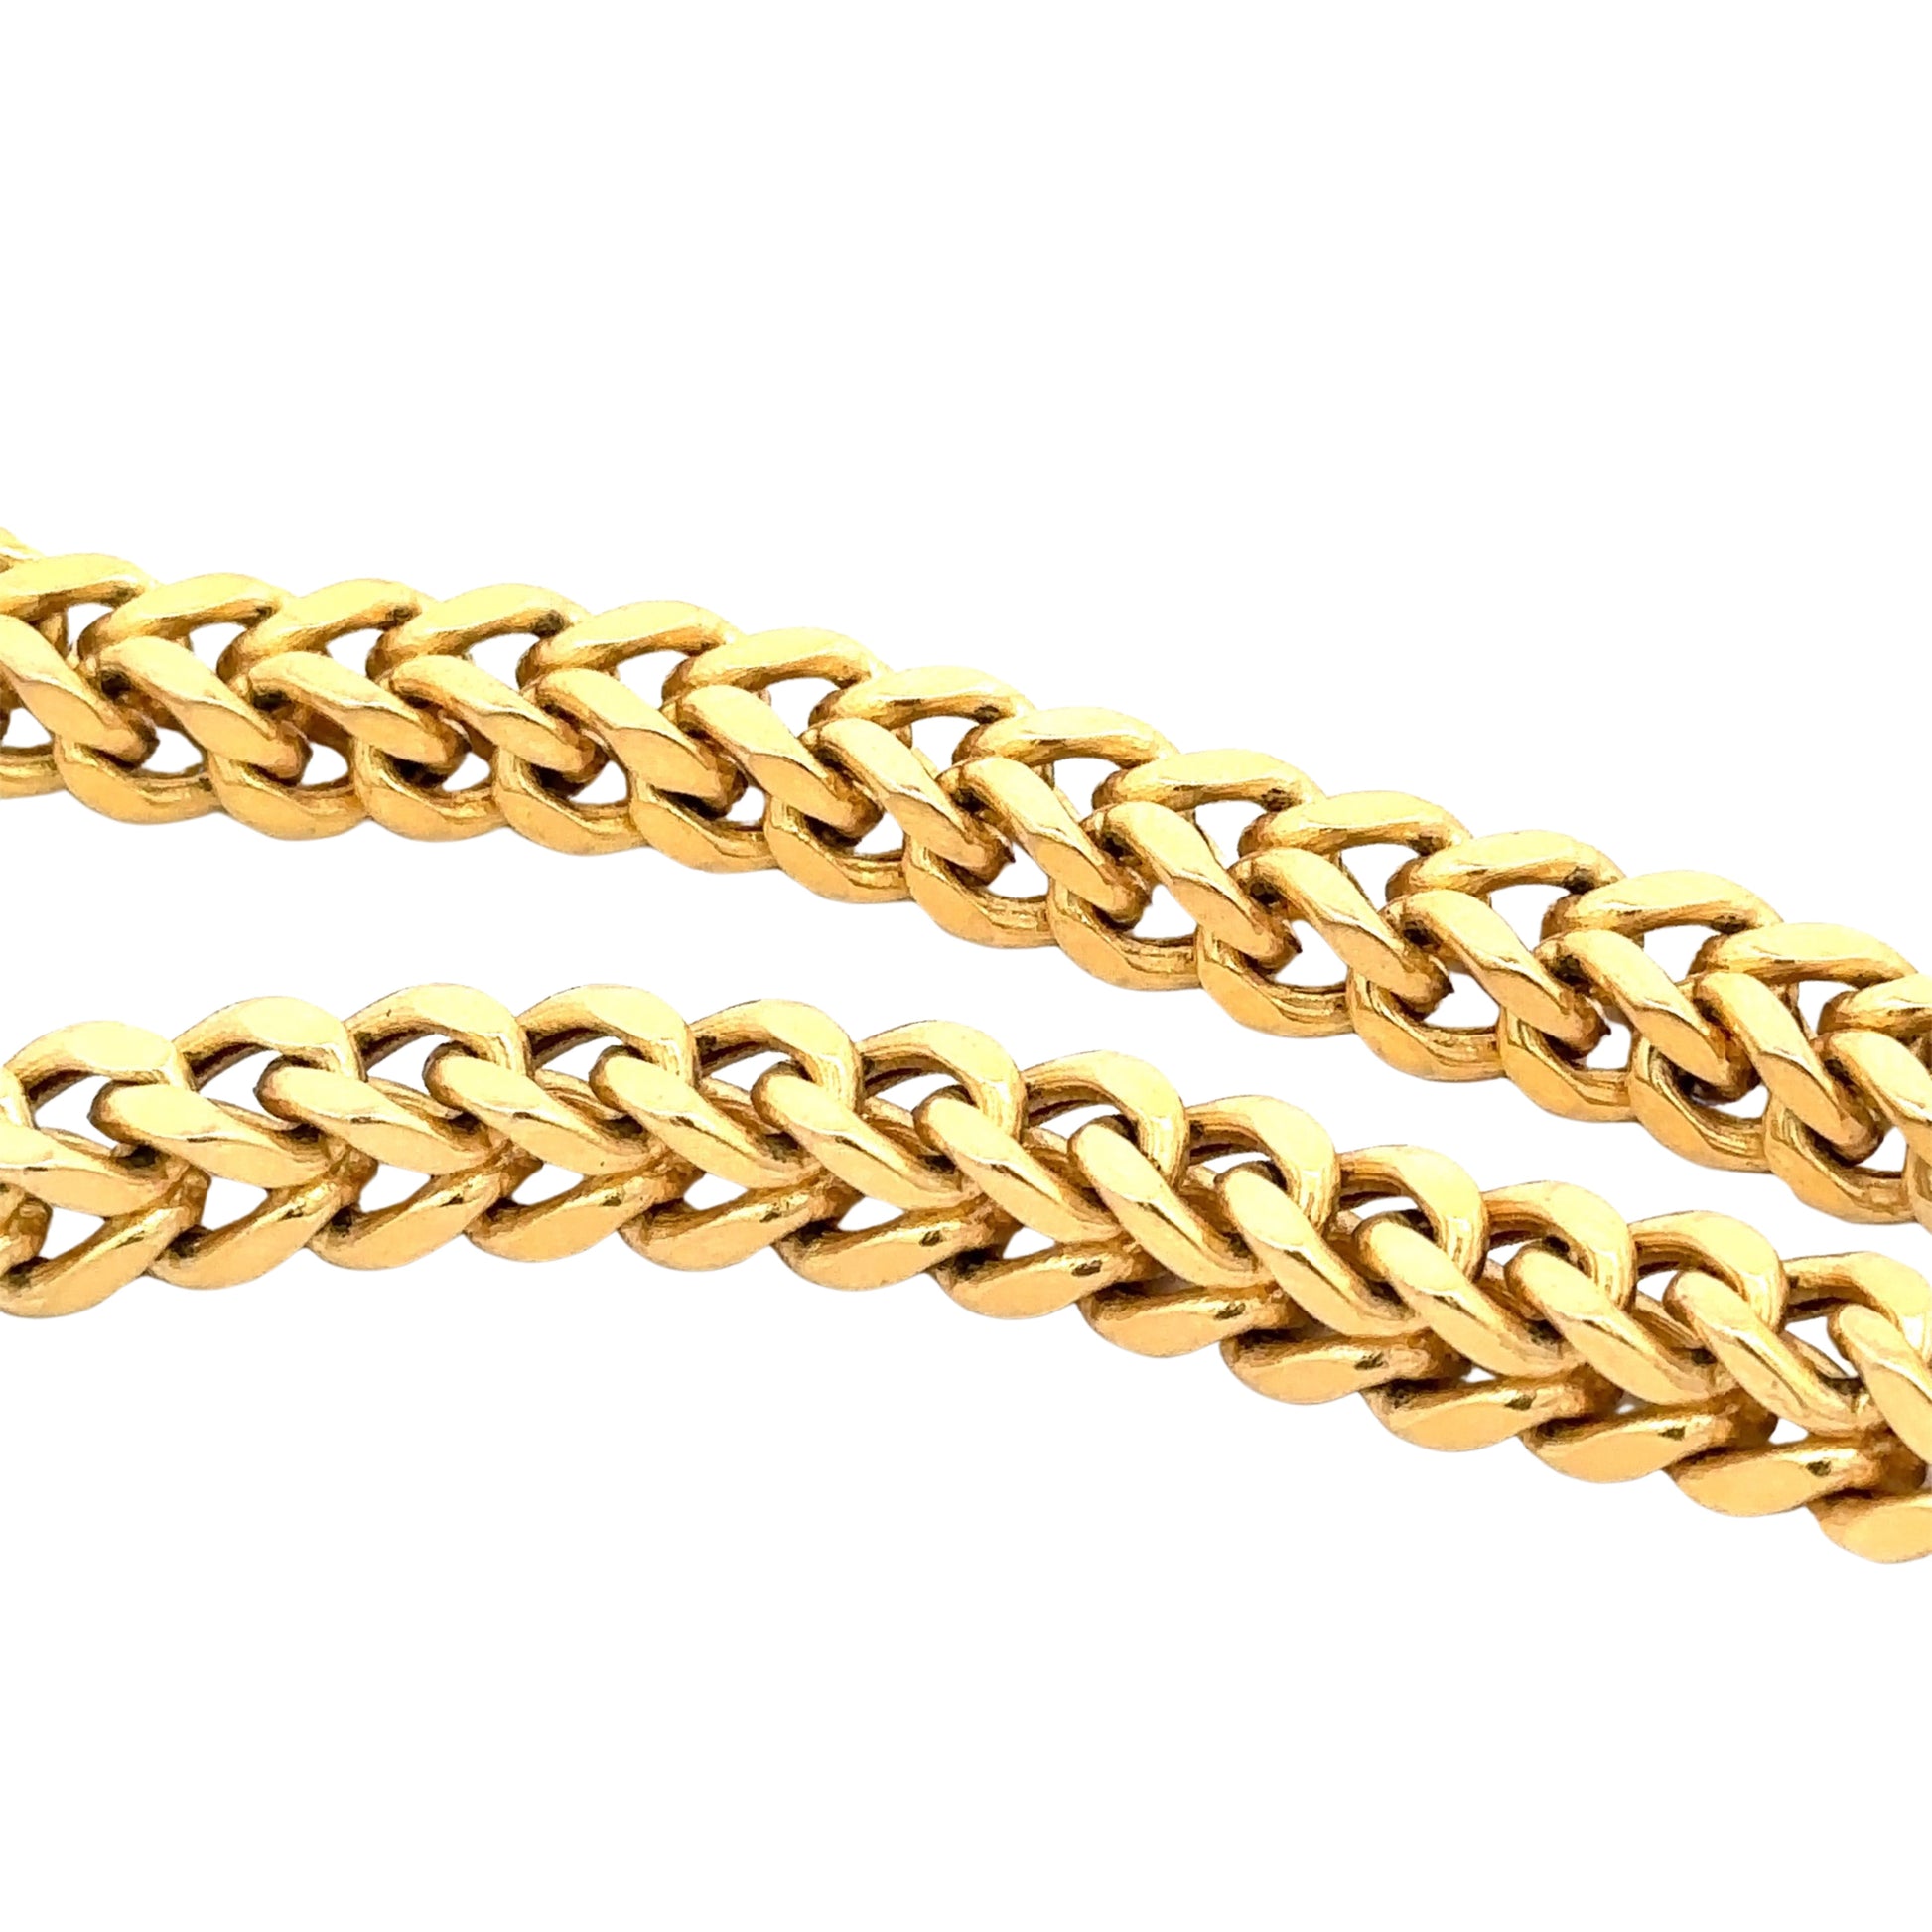 Another close up of square yellow gold franco chain links